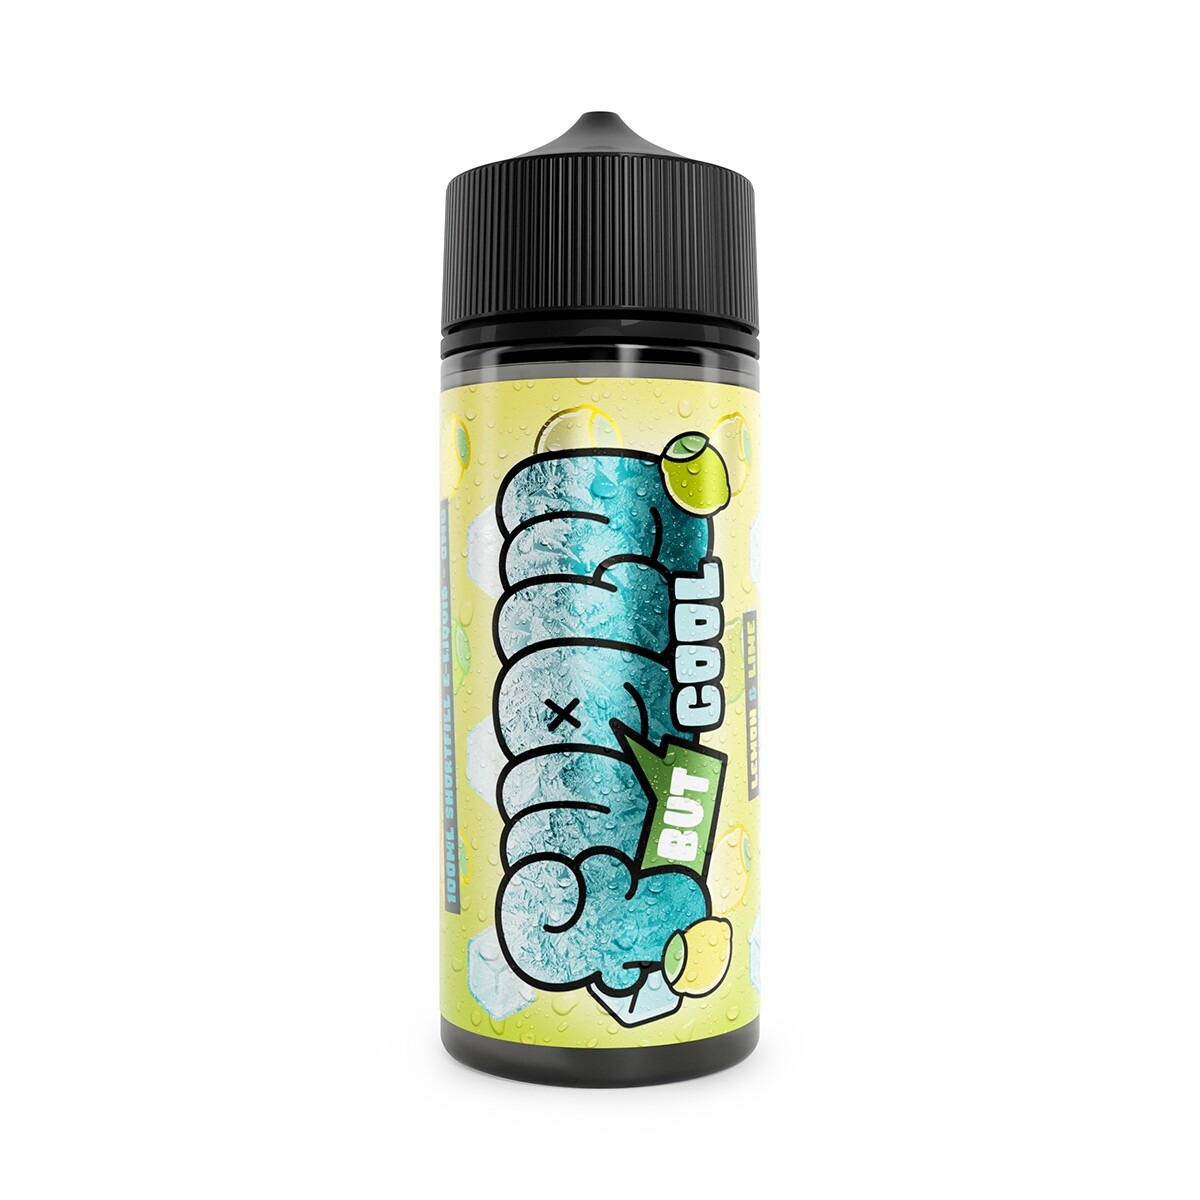 Get Your Fugly But Cool Lemon & Lime, A Marvellous Medley Of Flavours Over At Dispergo Vaping Uk